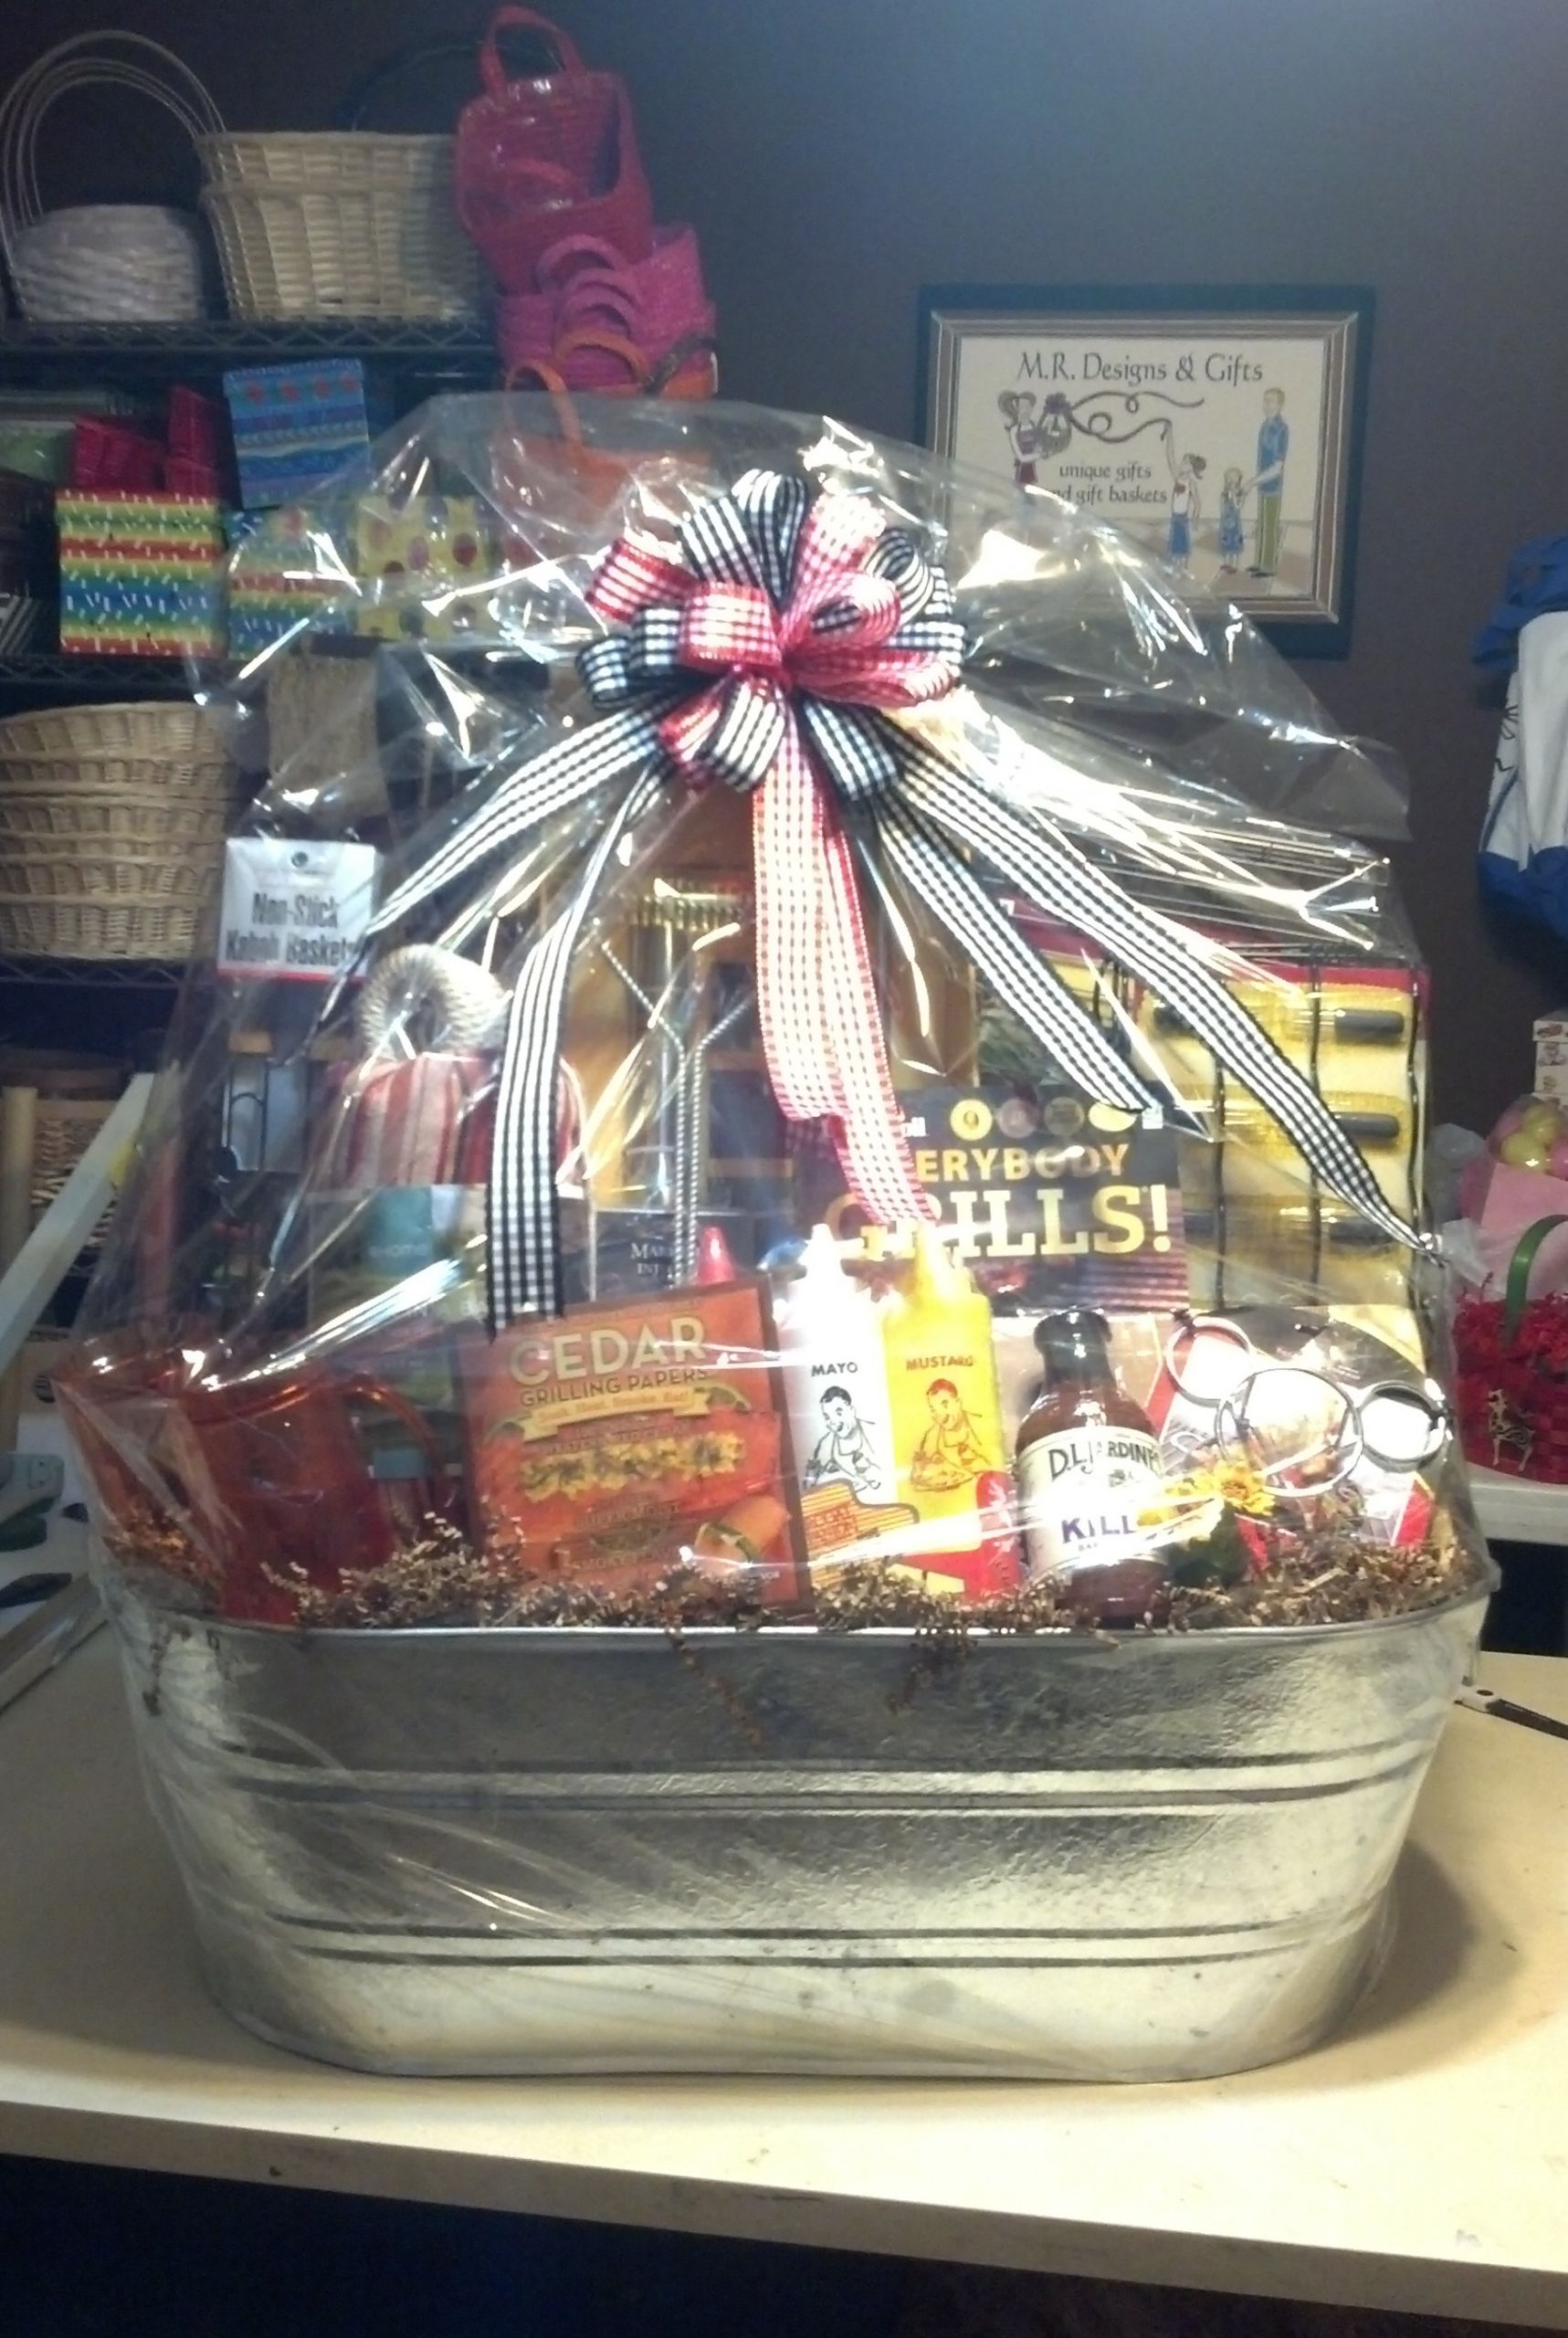 Gift Basket Ideas For Auctions
 Special Event and Silent Auction Gift Basket Ideas by M R